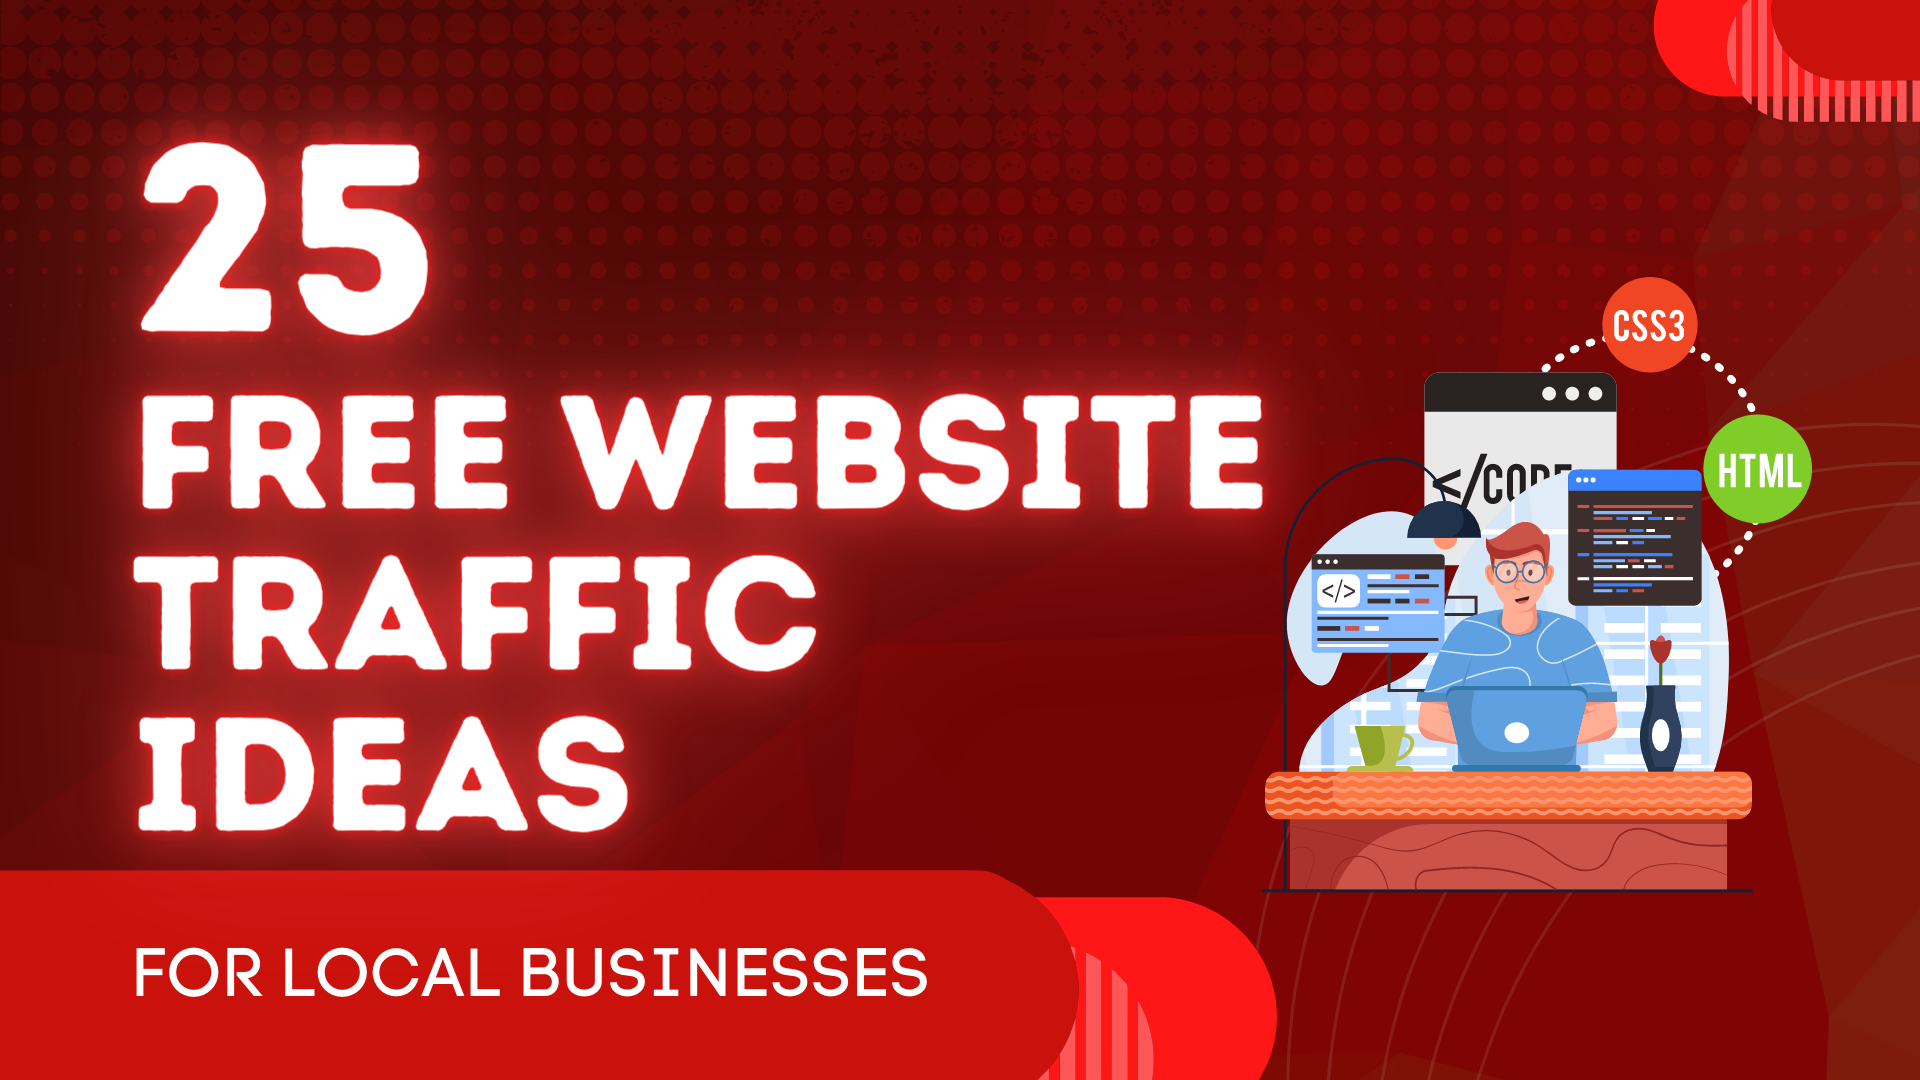 25 FREE Website Traffic Ideas for Your Local Business